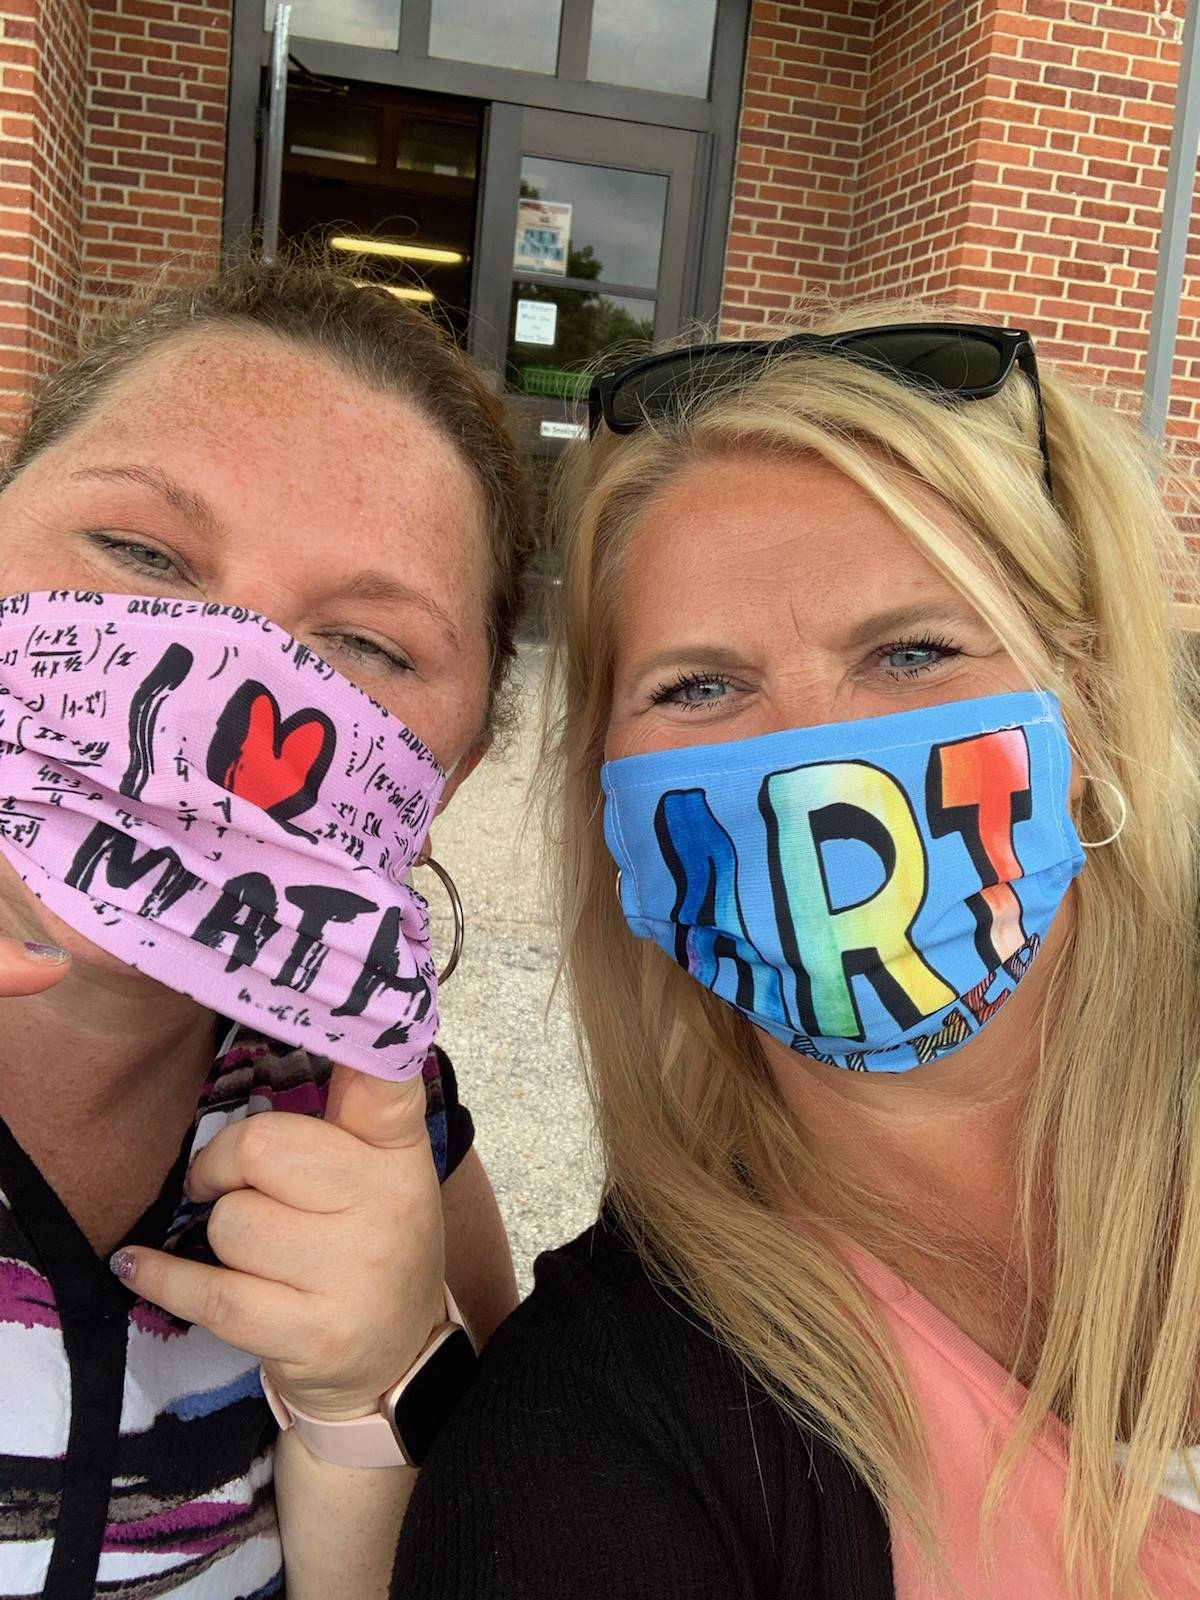 Mrs. Cox and Ms. Williamson wearing masks